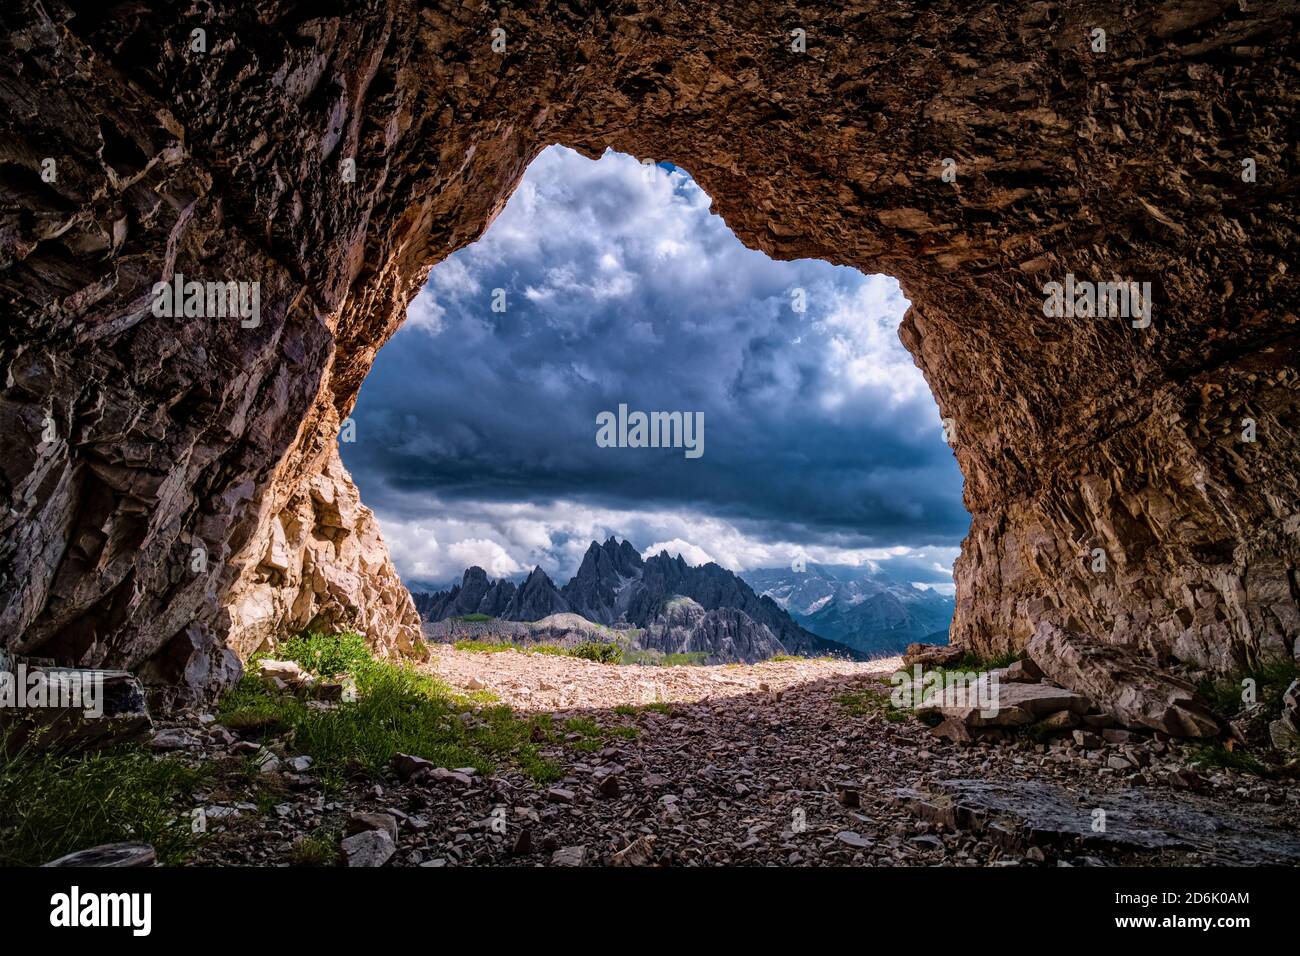 The mountain group Cadini di Misurina seen out of a cave above the mountain hut Auronzo, Rifugio Auronzo, dark thunderstorm clouds moving in. Stock Photo